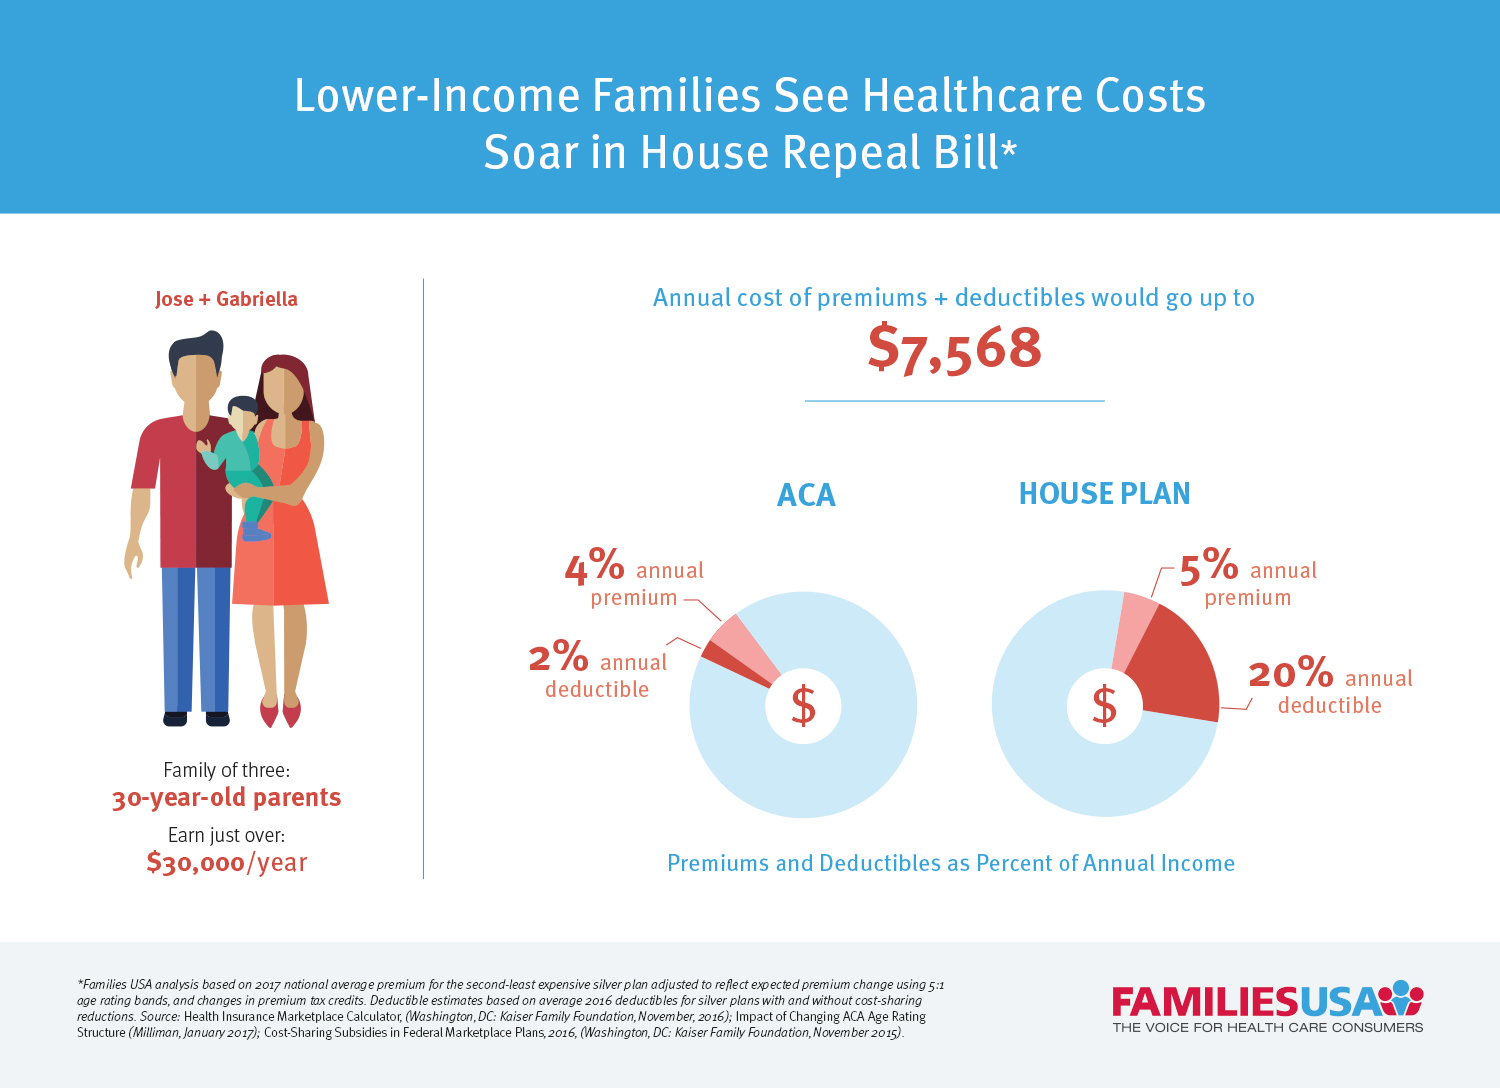 https://familiesusa.org/wp-content/uploads/2017/03/Increases_in_Premiums_and_Deductibles_House_GOP_Plan_Infographic.jpg